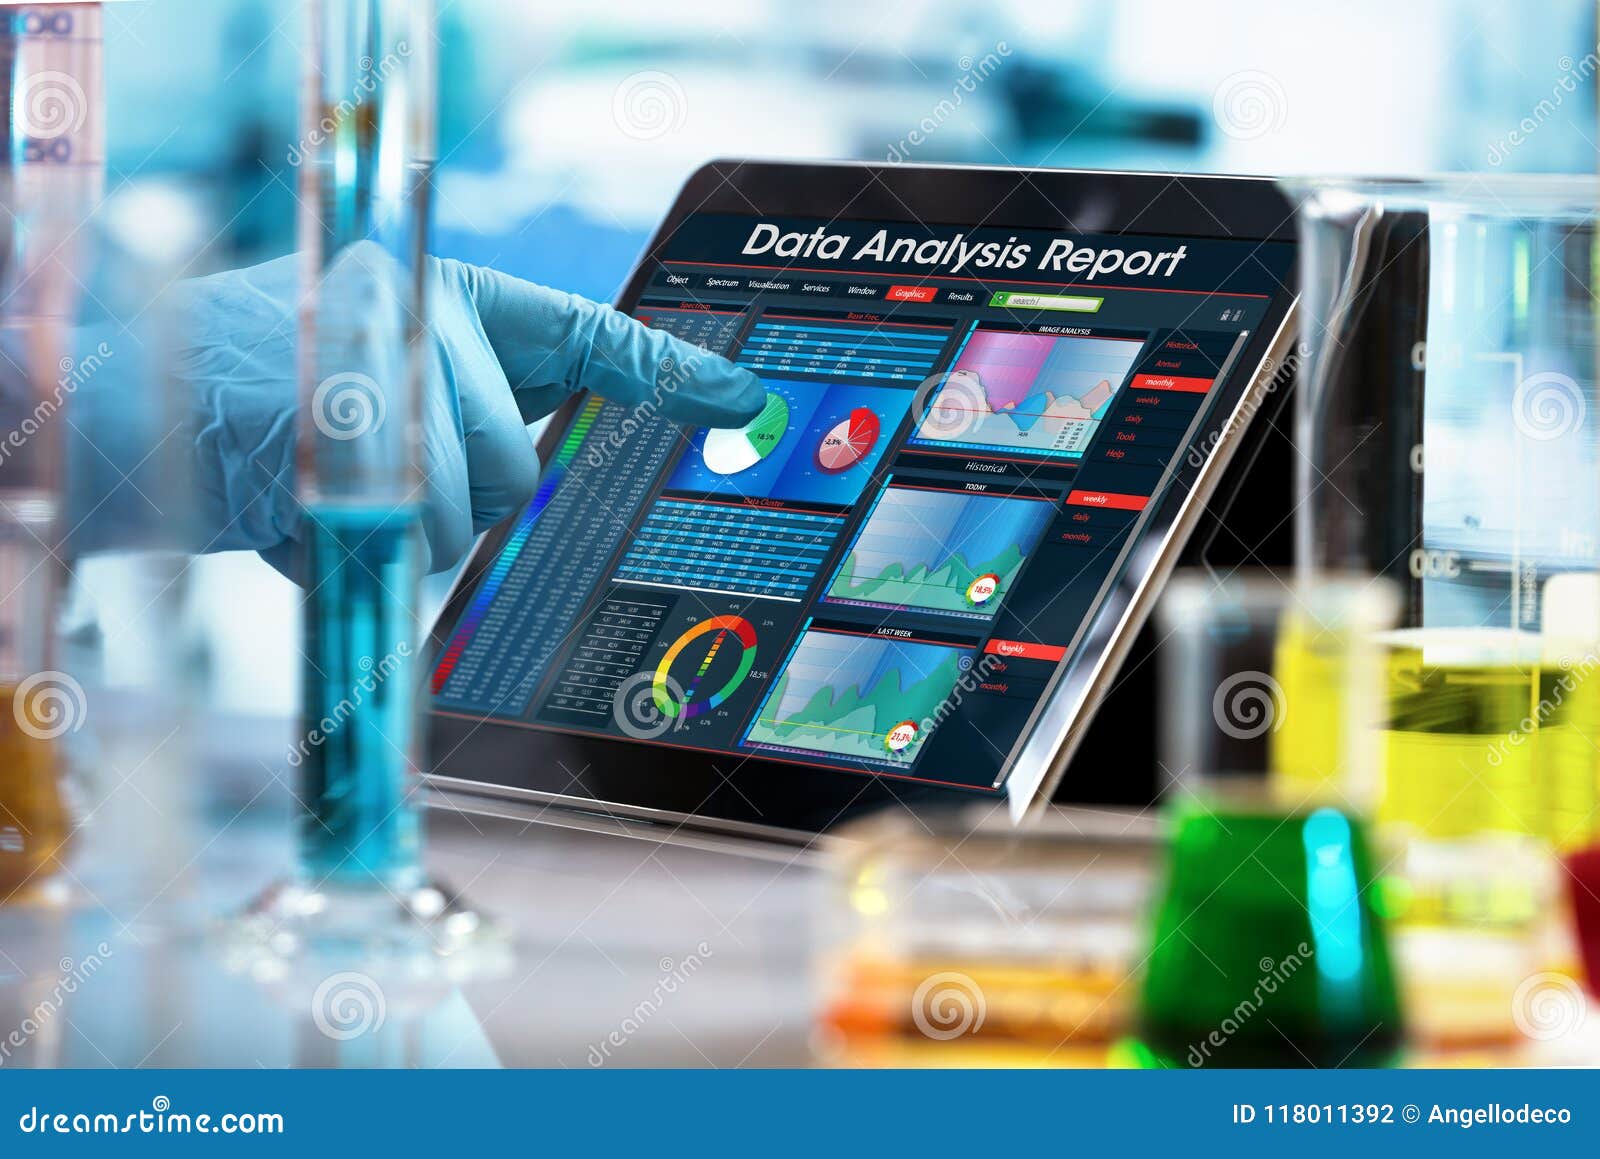 researcher working with data analysis report in digital tablet o